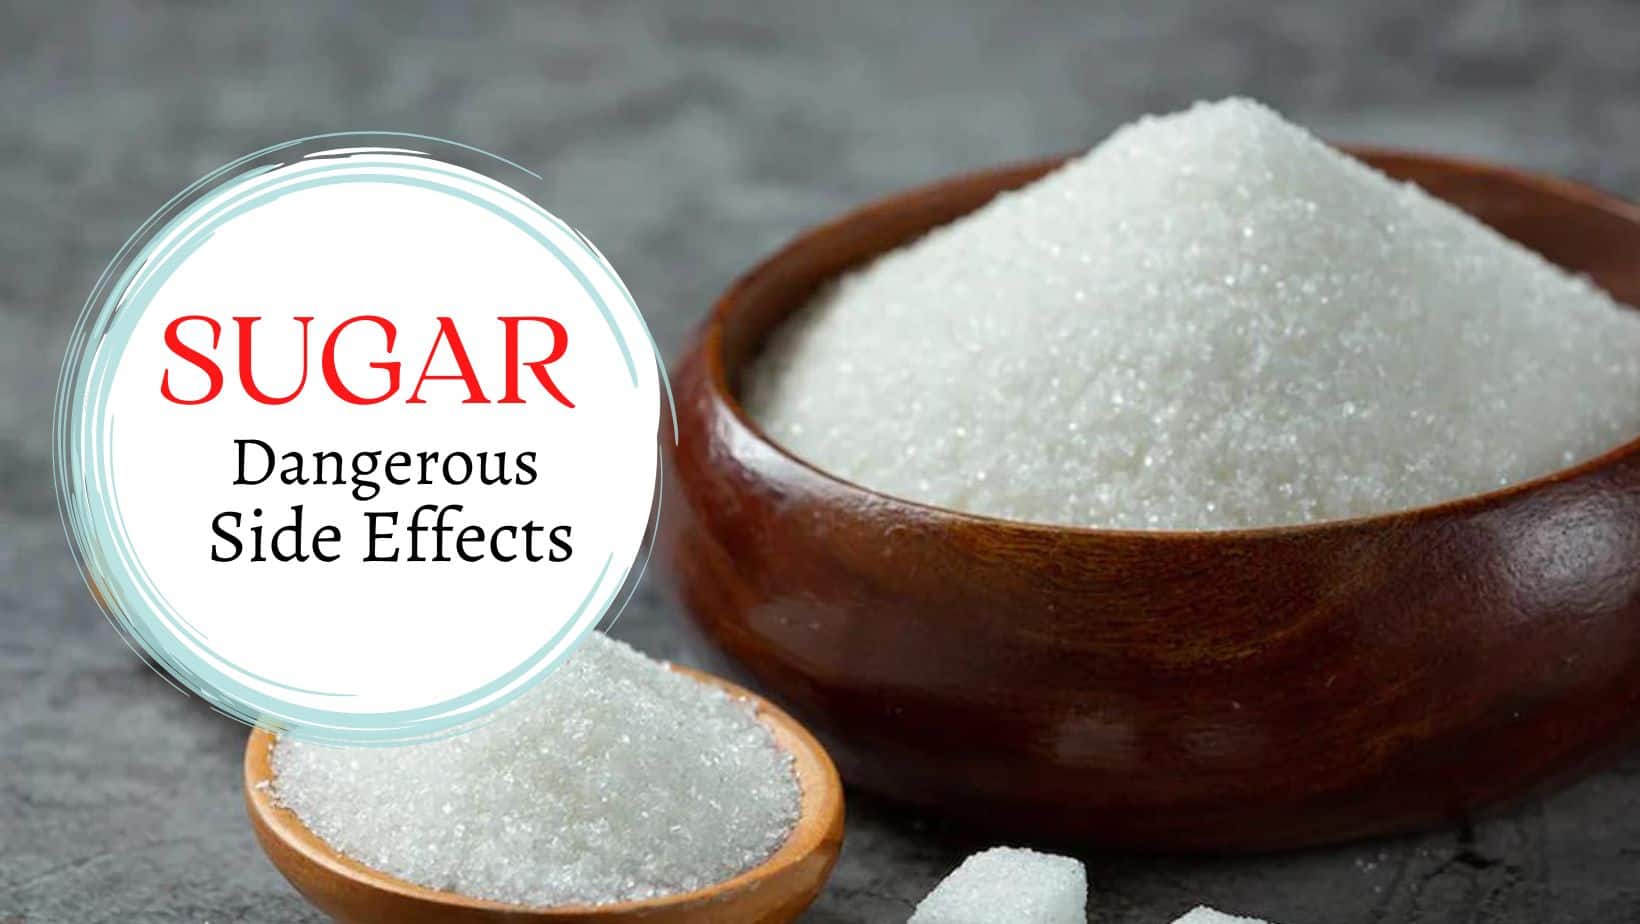 7 Unusual Side Effects of Sugar: What Happens When You Eat Too Much Sugar